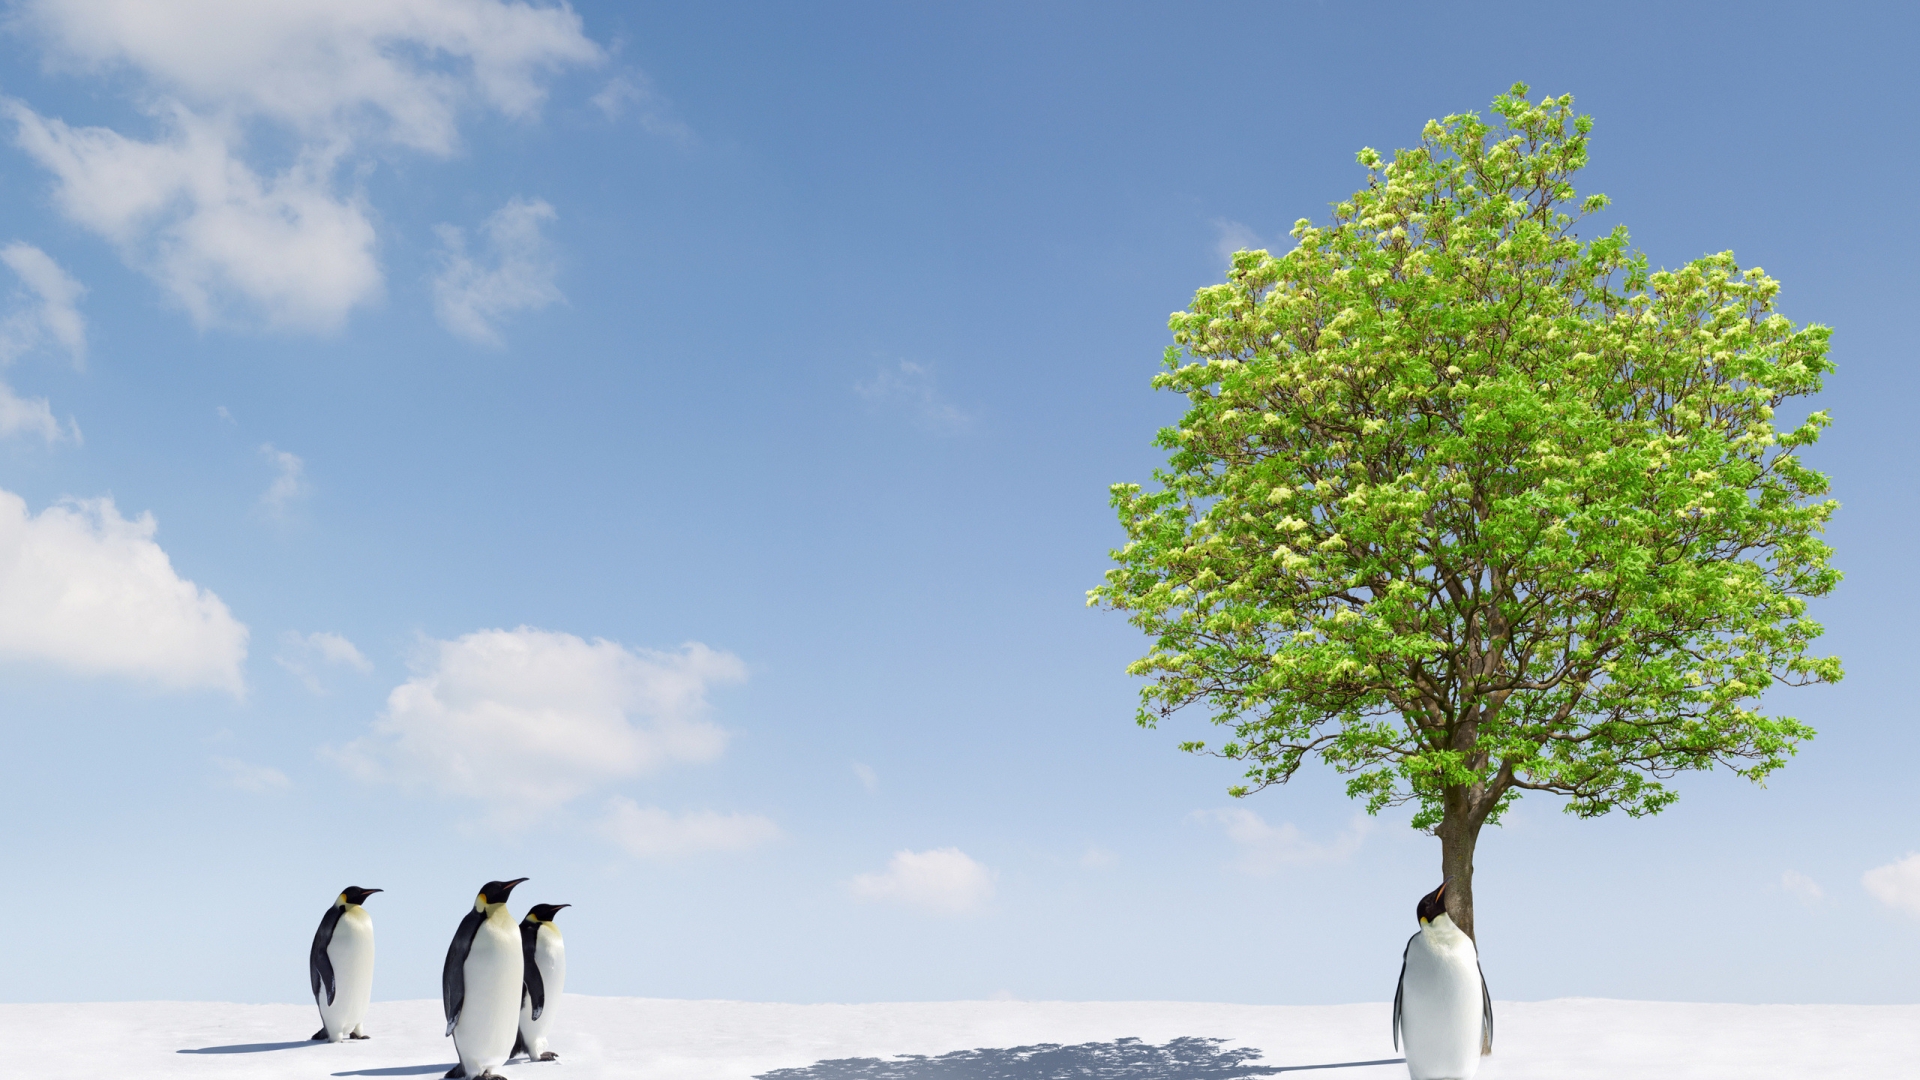 Penguins and Green Tree for 1920 x 1080 HDTV 1080p resolution